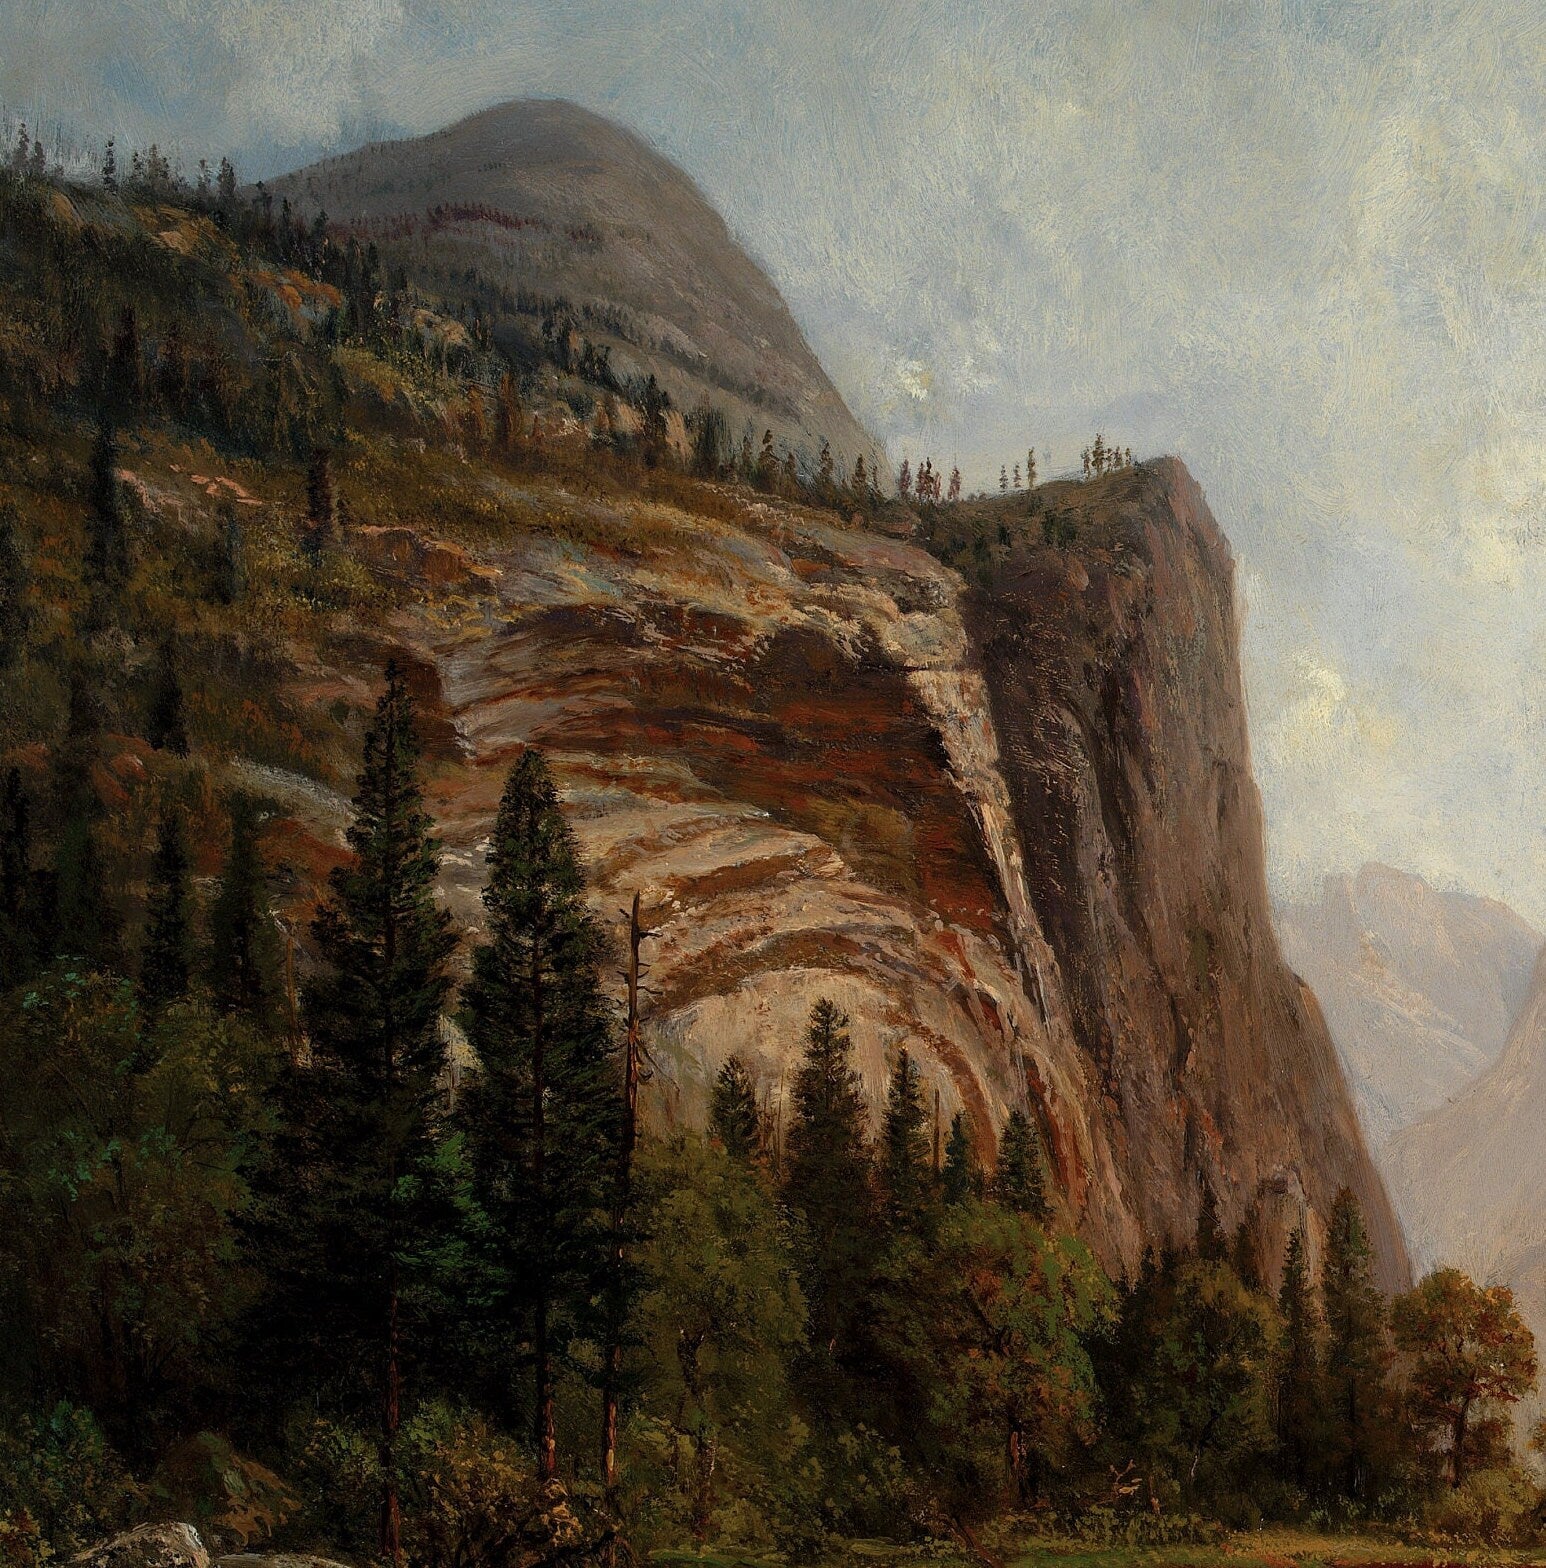 Gates of the Yosemite - by Albert Bierstadt,3d Printed with texture and brush strokes looks like original oil-painting, code:820